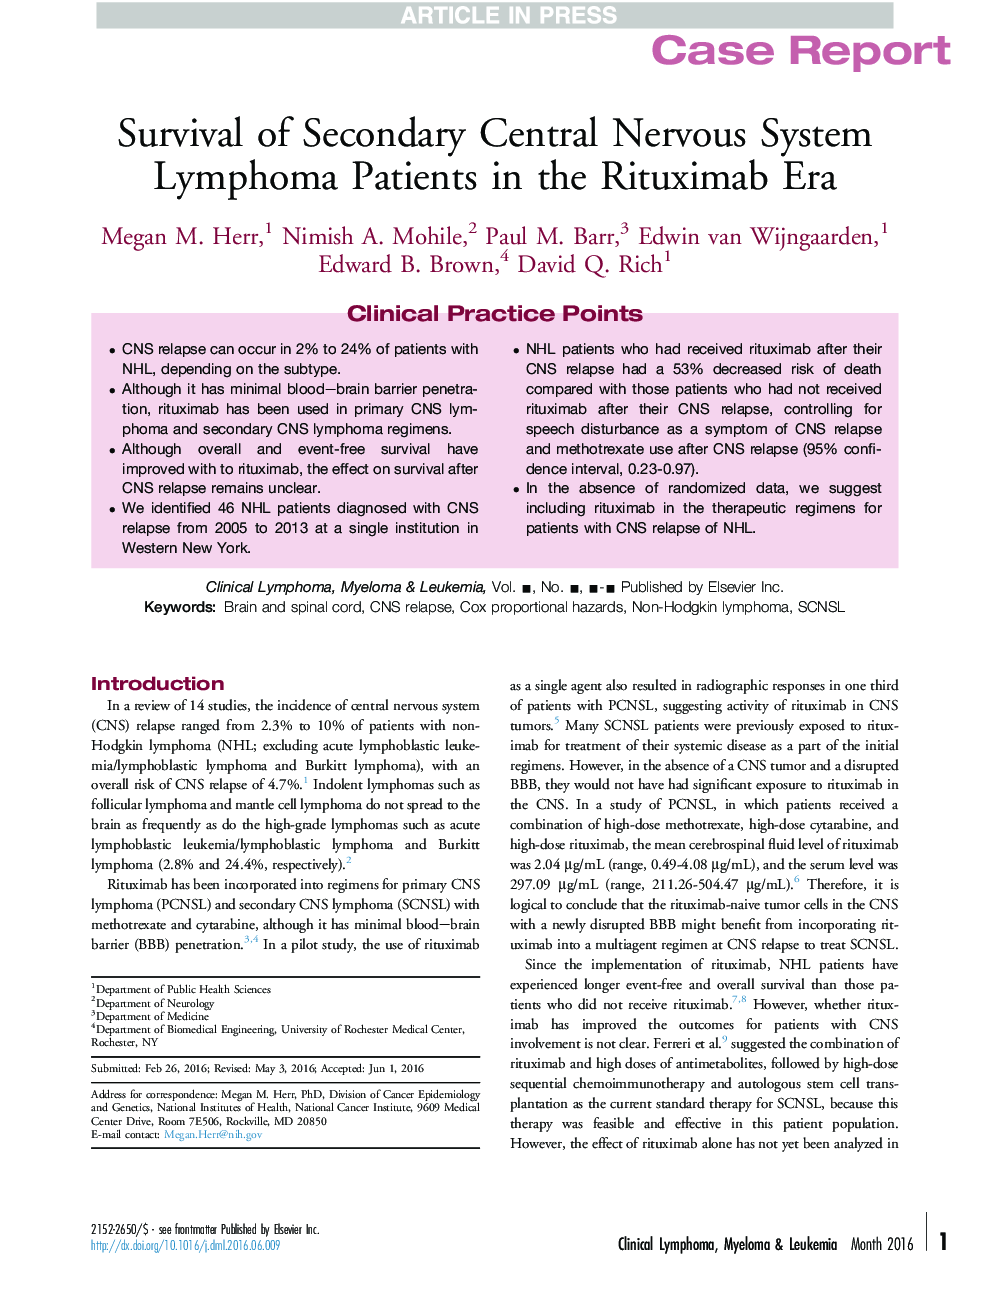 Survival of Secondary Central Nervous System Lymphoma Patients in the Rituximab Era